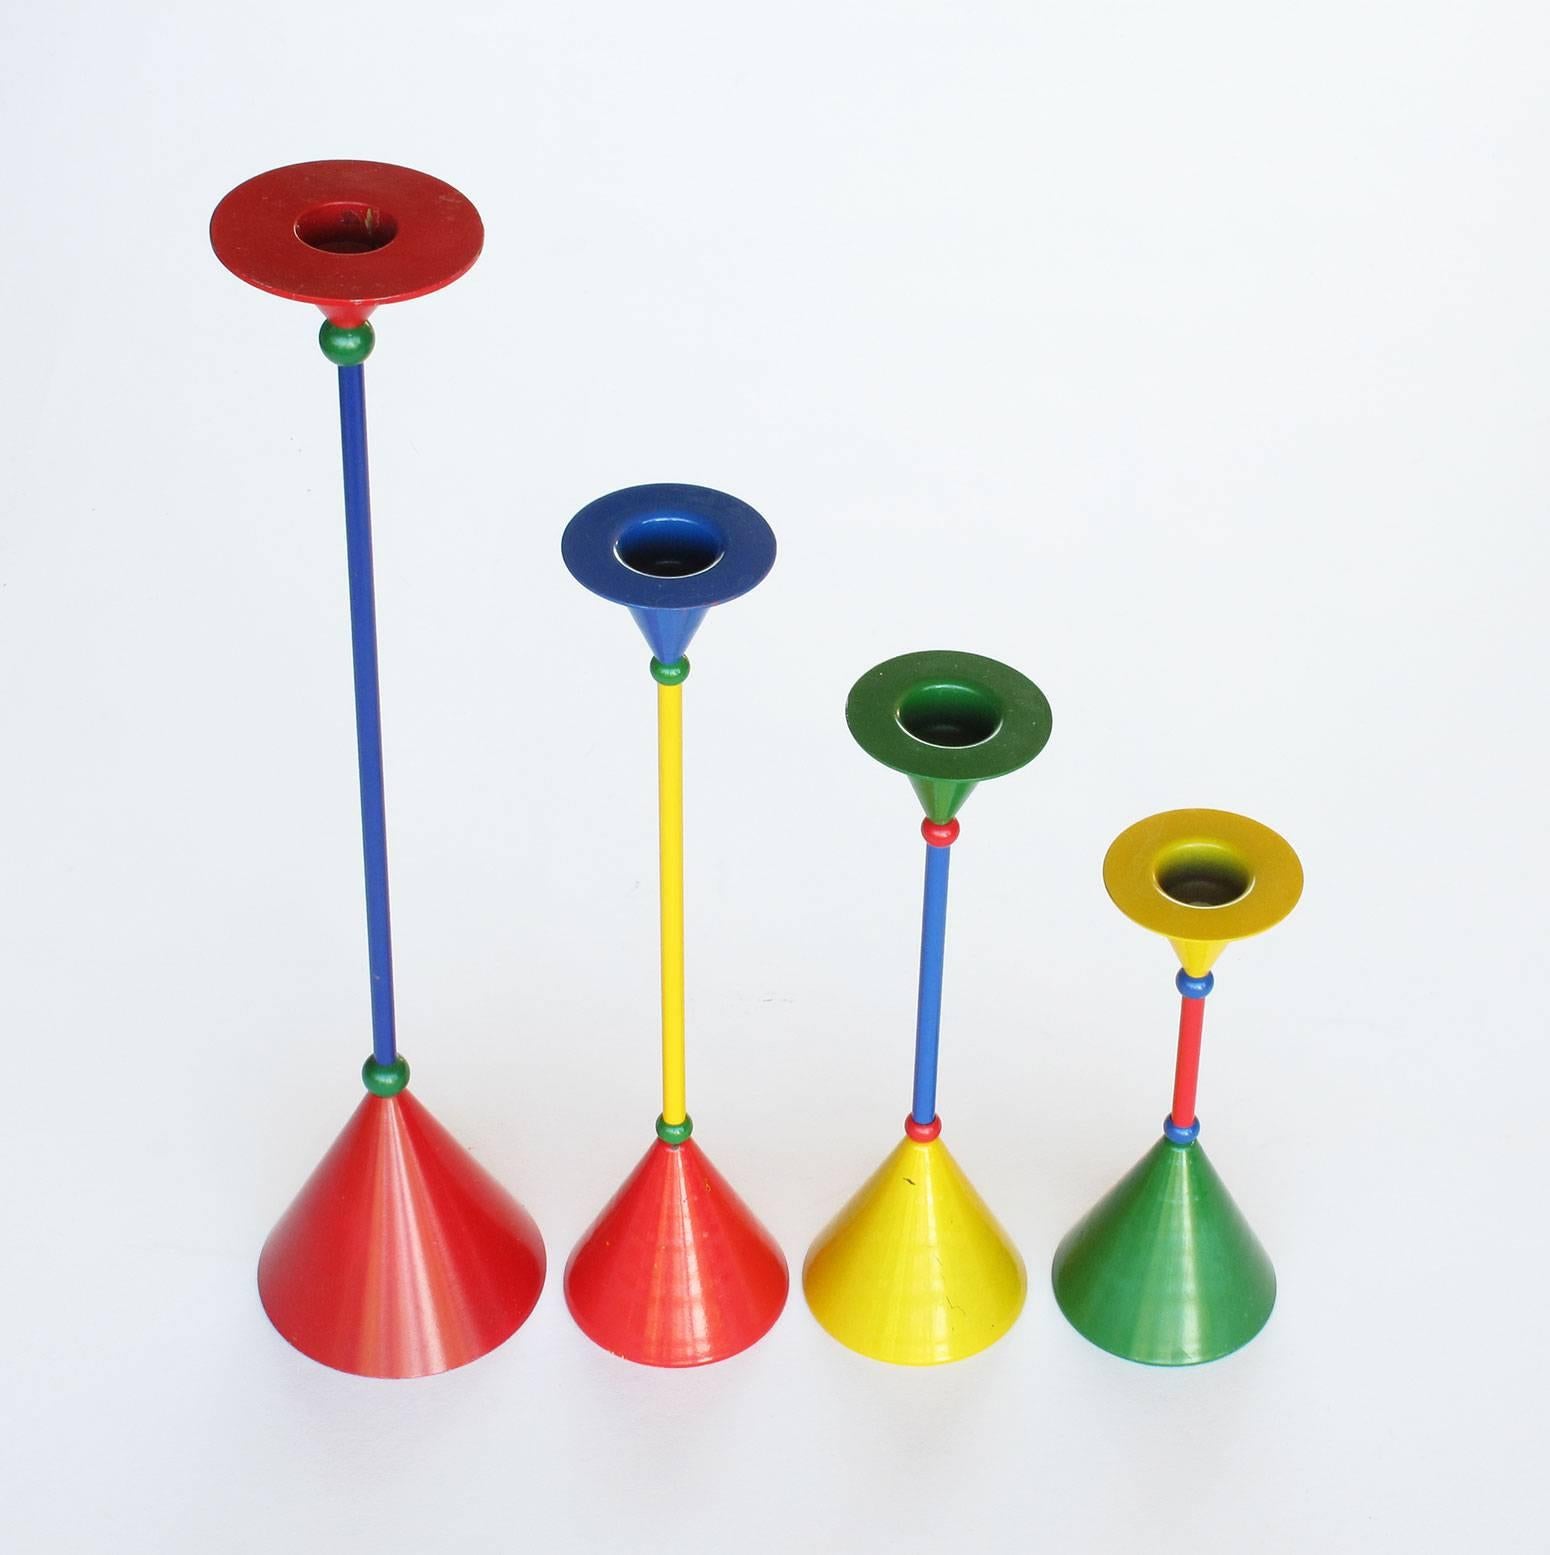 Fun collection of four multicolored vintage candlesticks in the style of Memphis Milano, metal and paint, late 1980s, Romania, dimensions from tallest to shortest in inches: (1) 13.25 high x 3 base diameter, (2) 10 x 2.5 base diameter, (3) 8 x 2.5